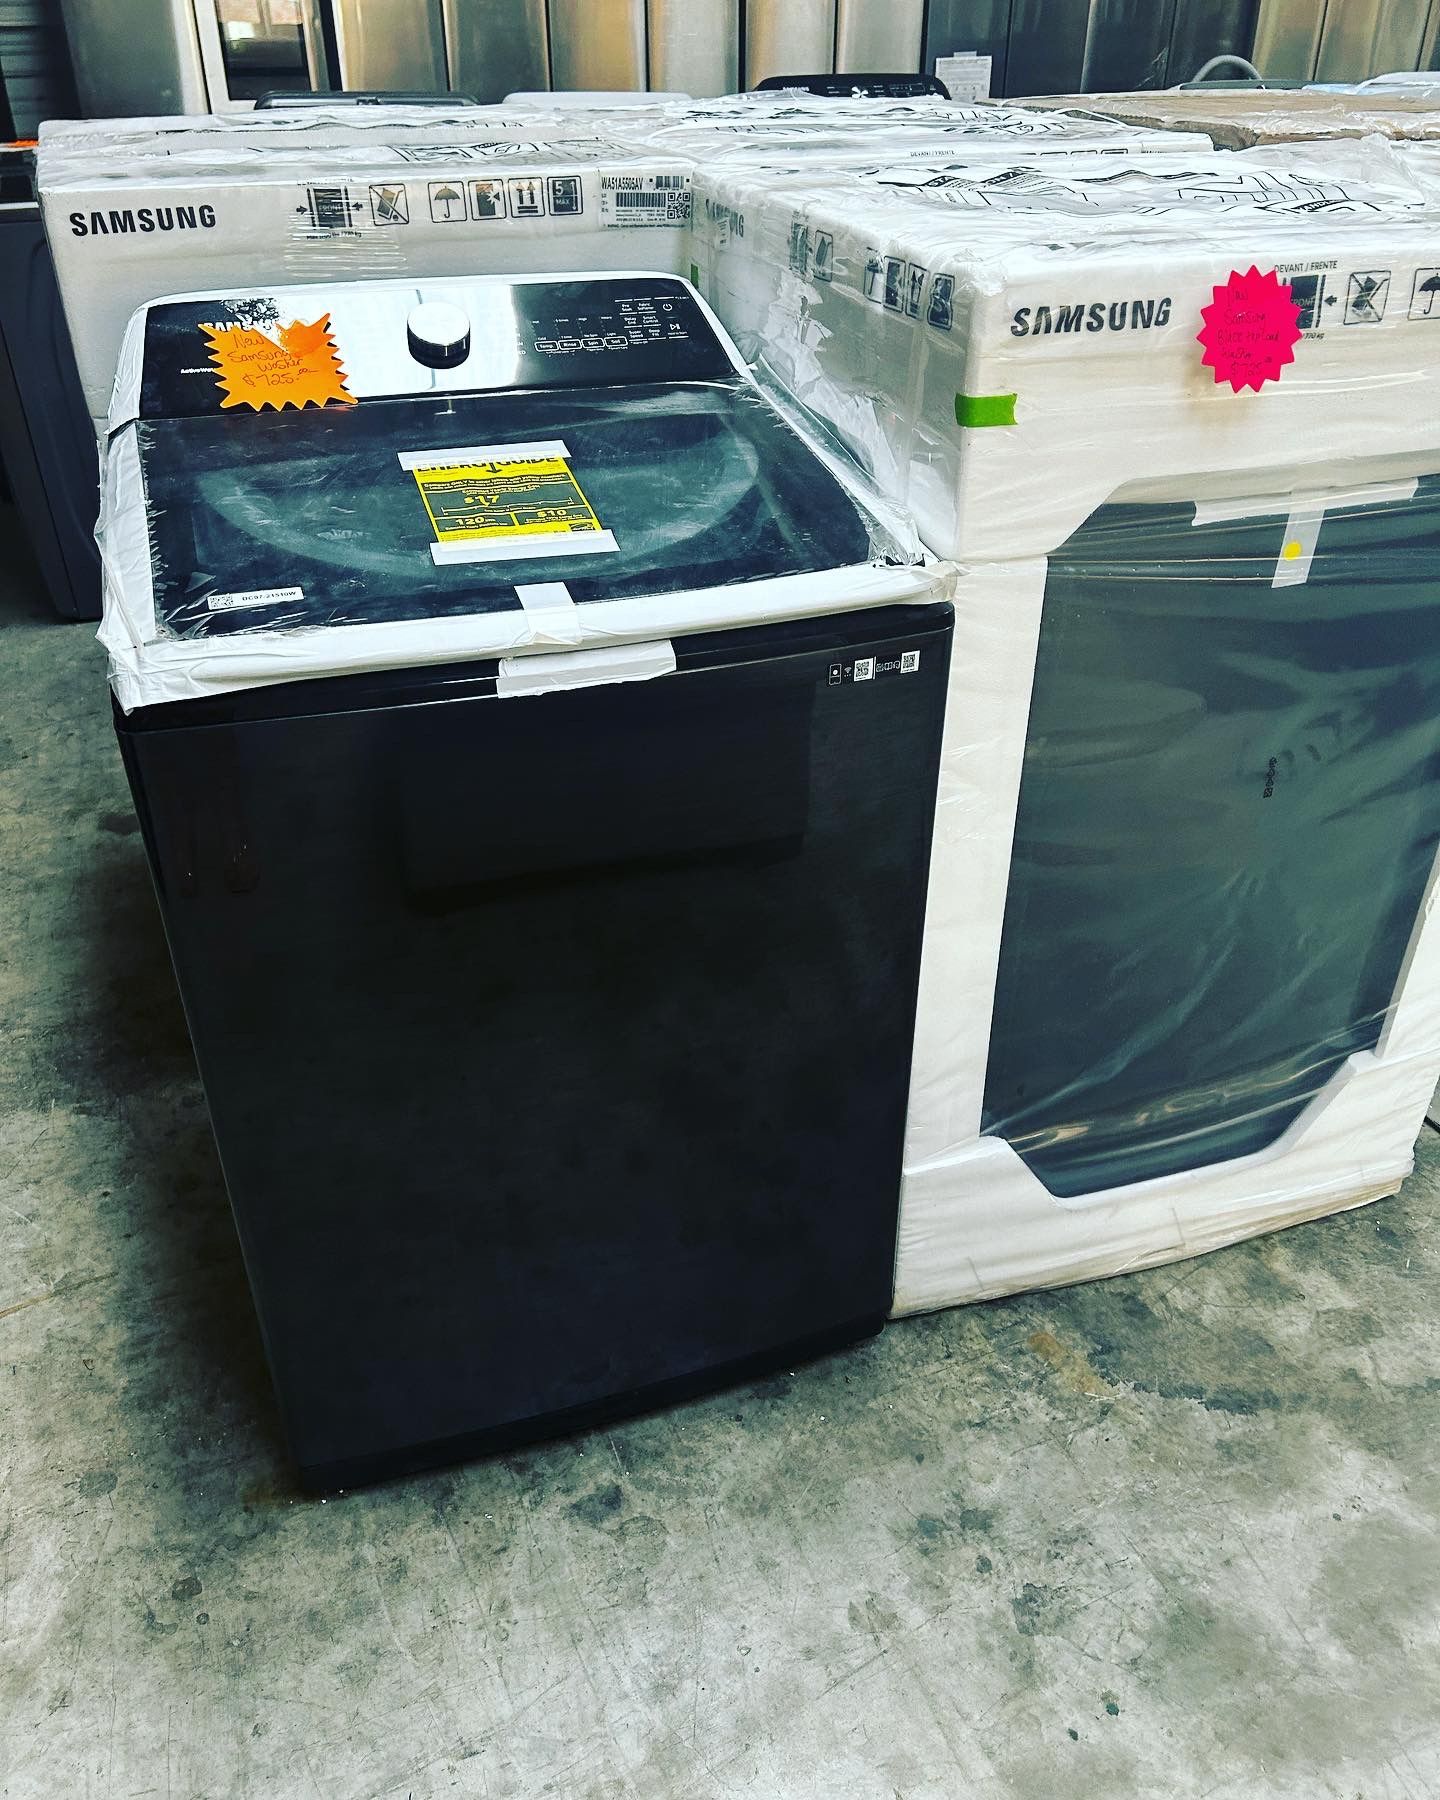 NEW SAMSUNG BLACK TOP LOAD WASHER AND DRYER SET $1450 1 Year Warranty 